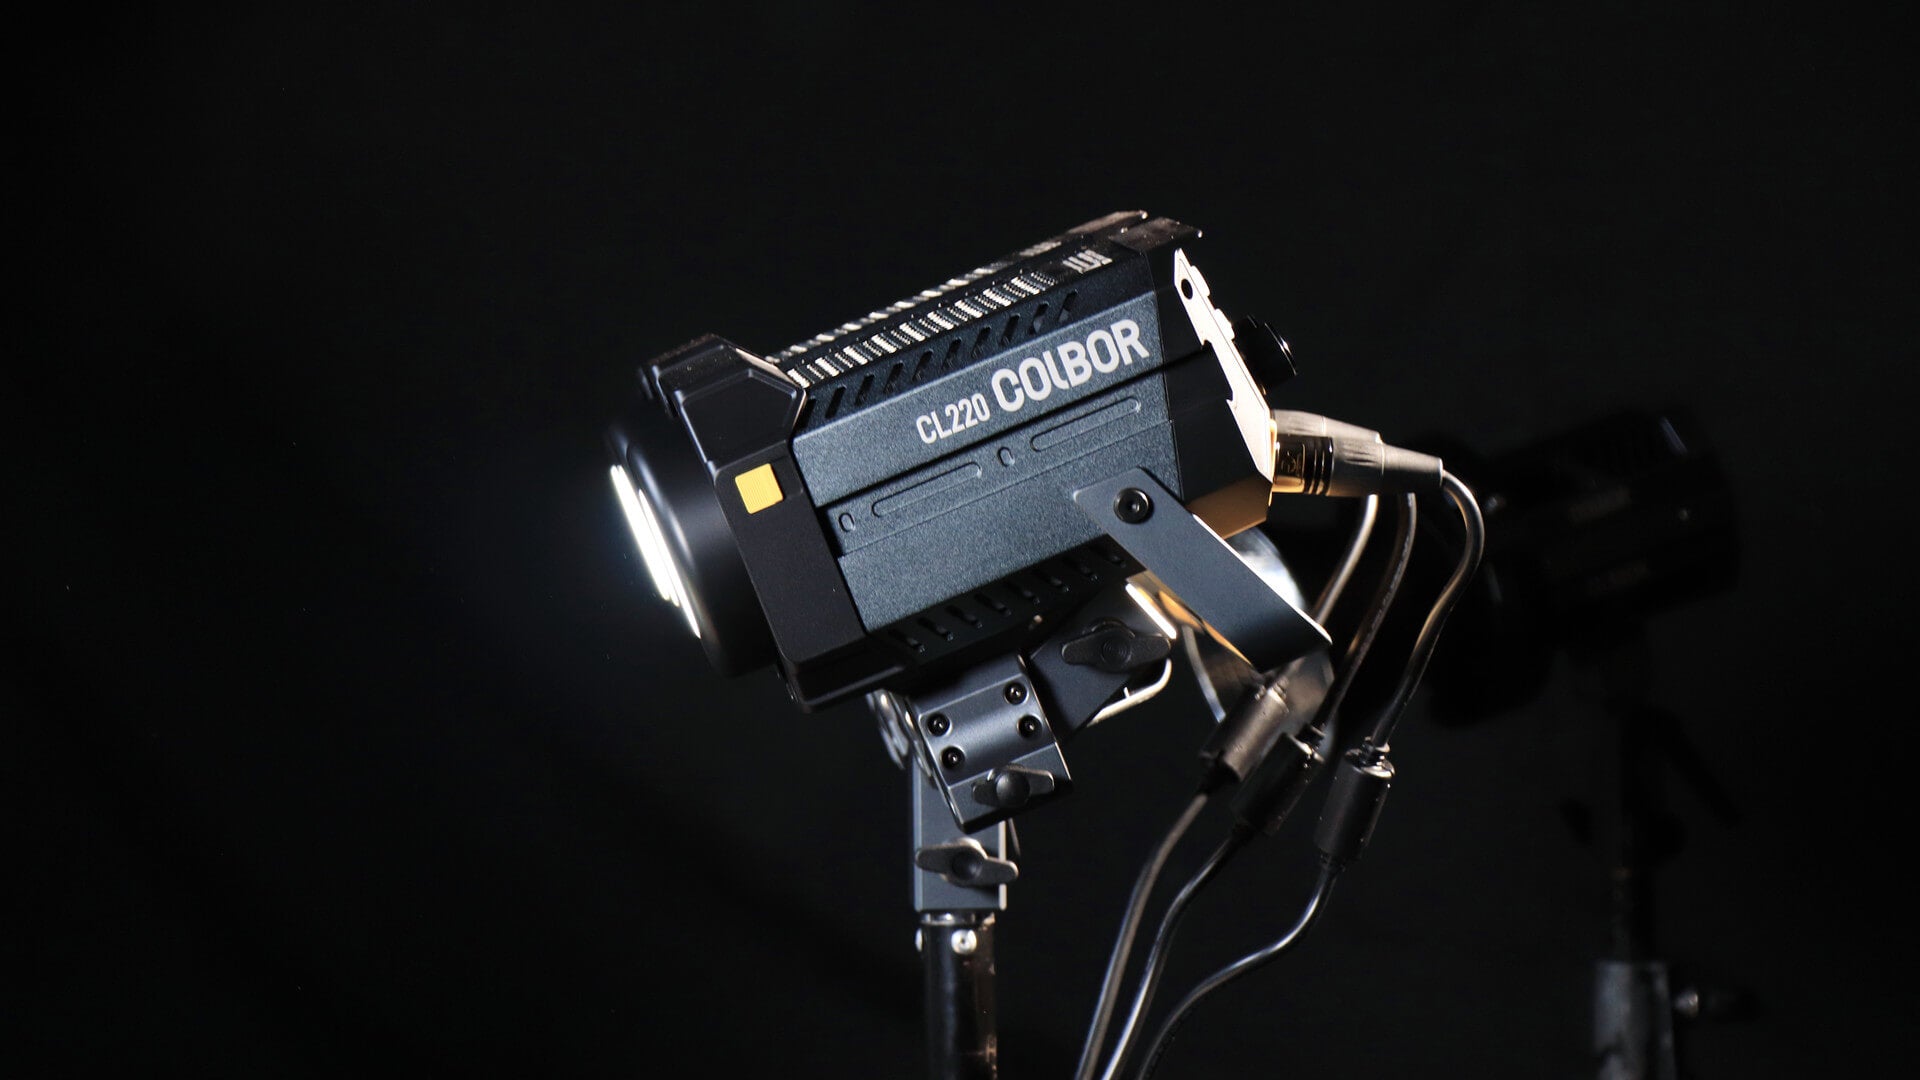 Lighting for overhead video: Why does it matter and how to set it up?